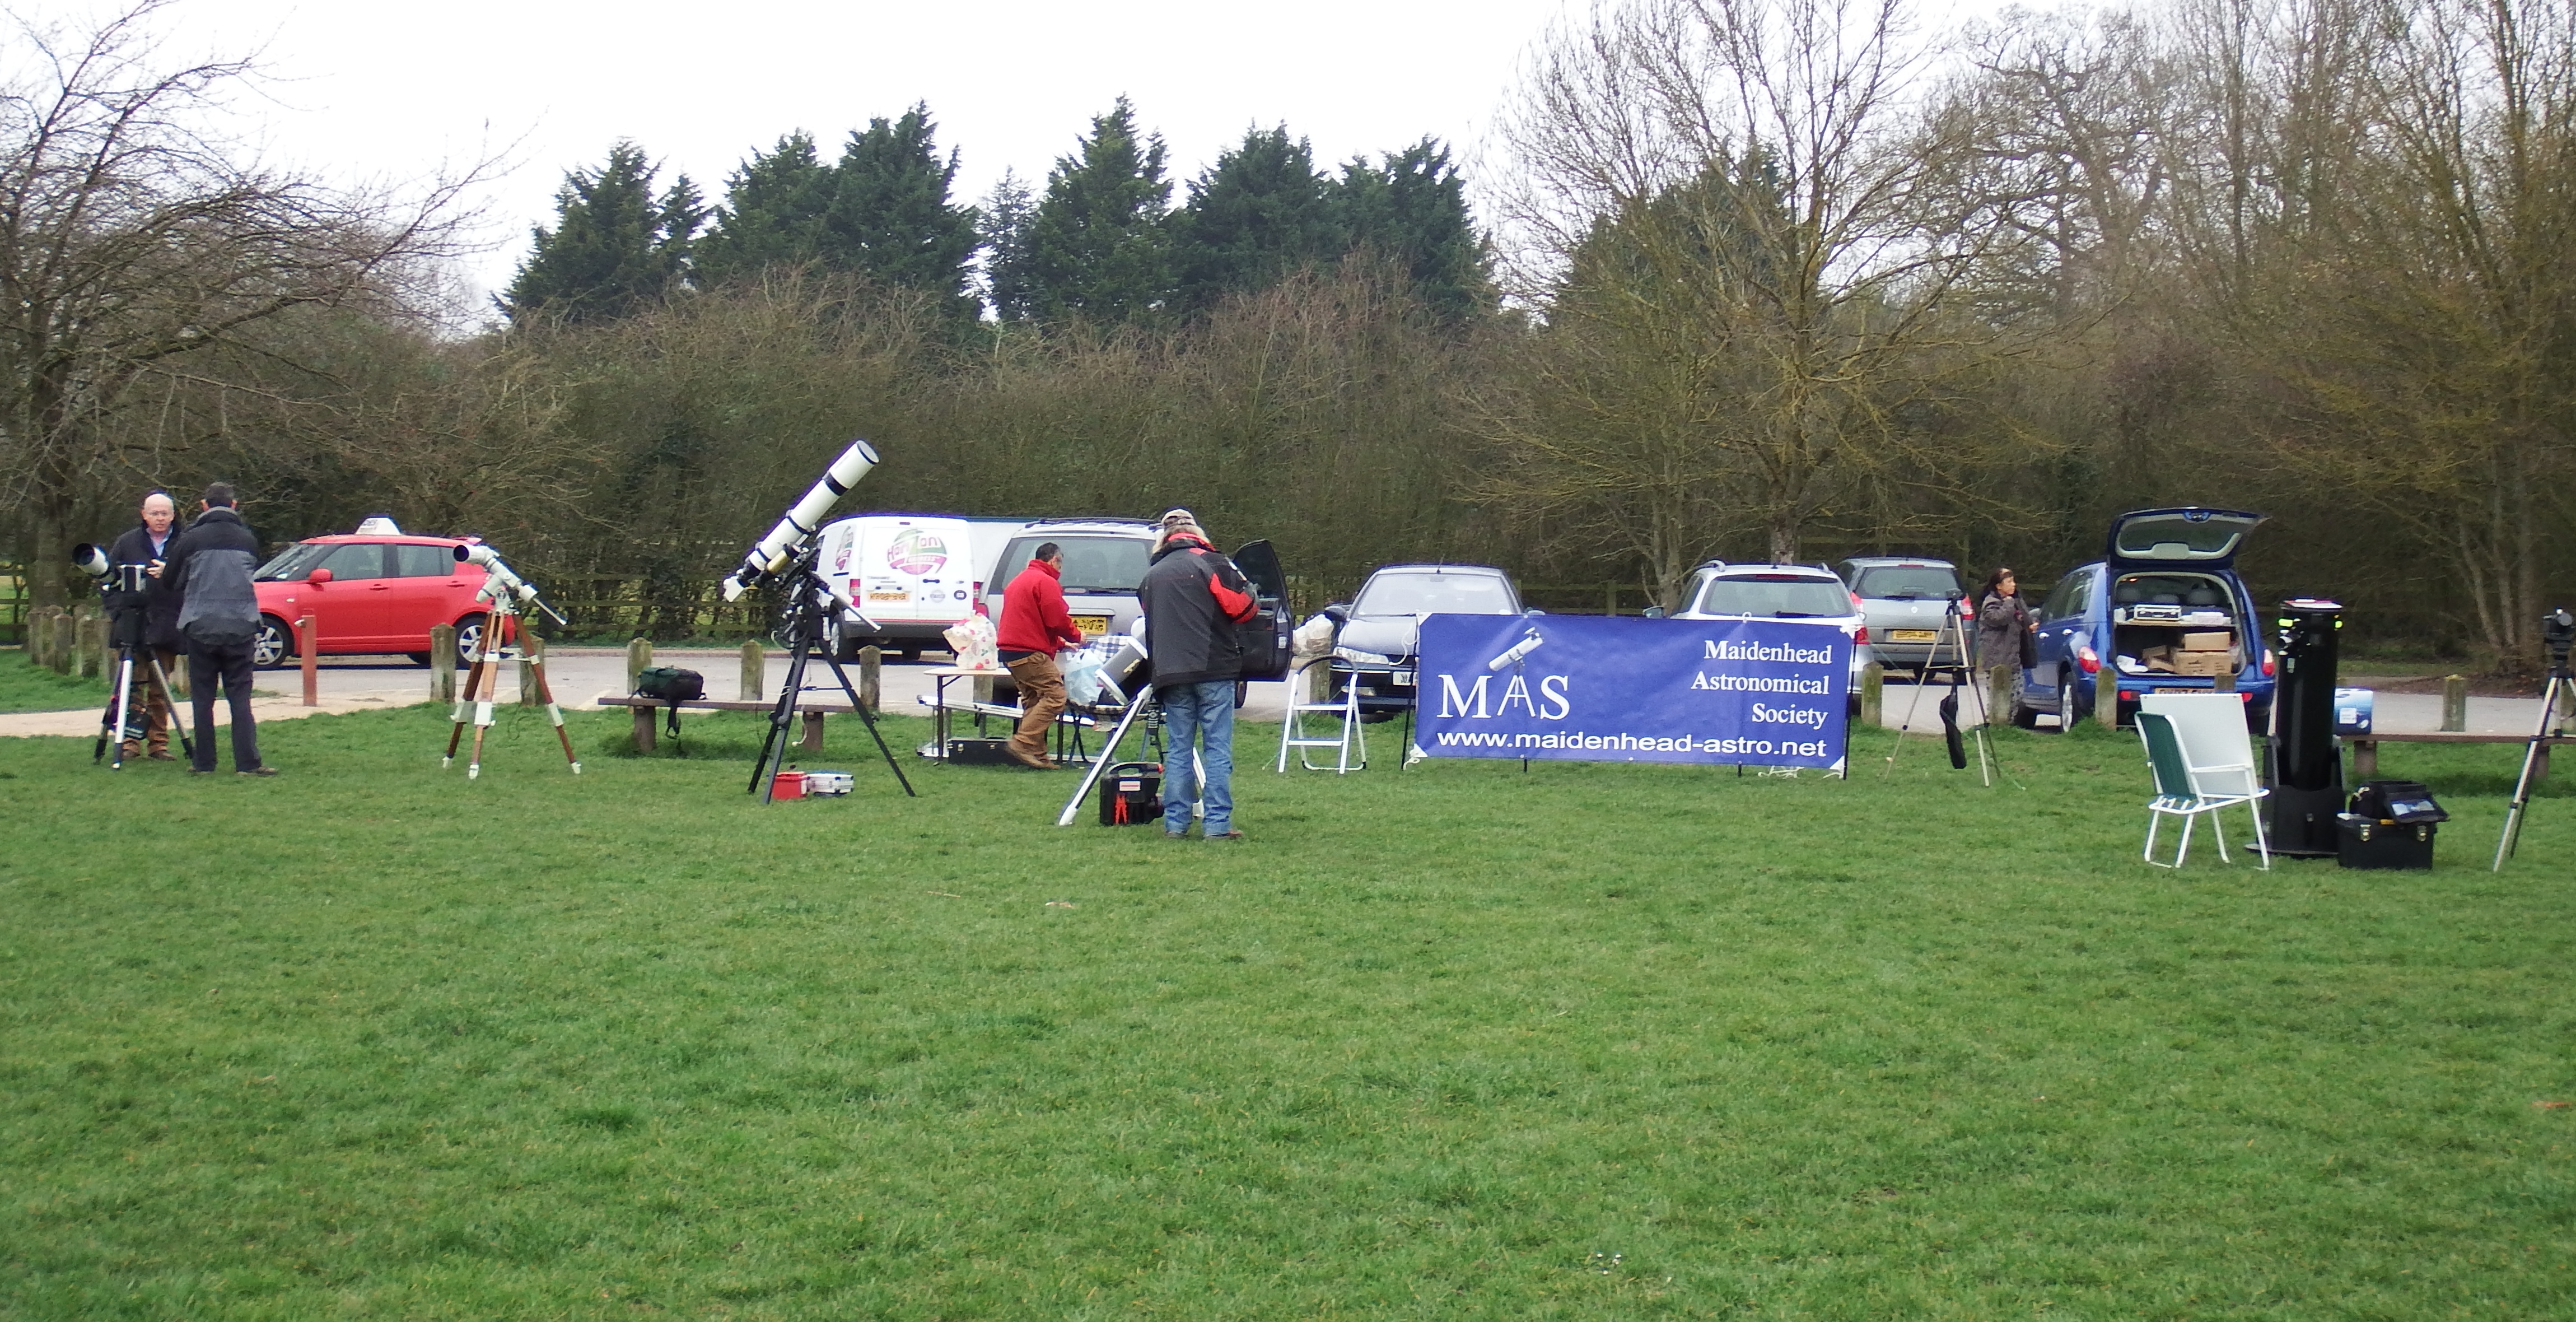 Photo: ../Outreach_&_Events/photos/2015-03-20_setting-up-at-Ockwells.jpg